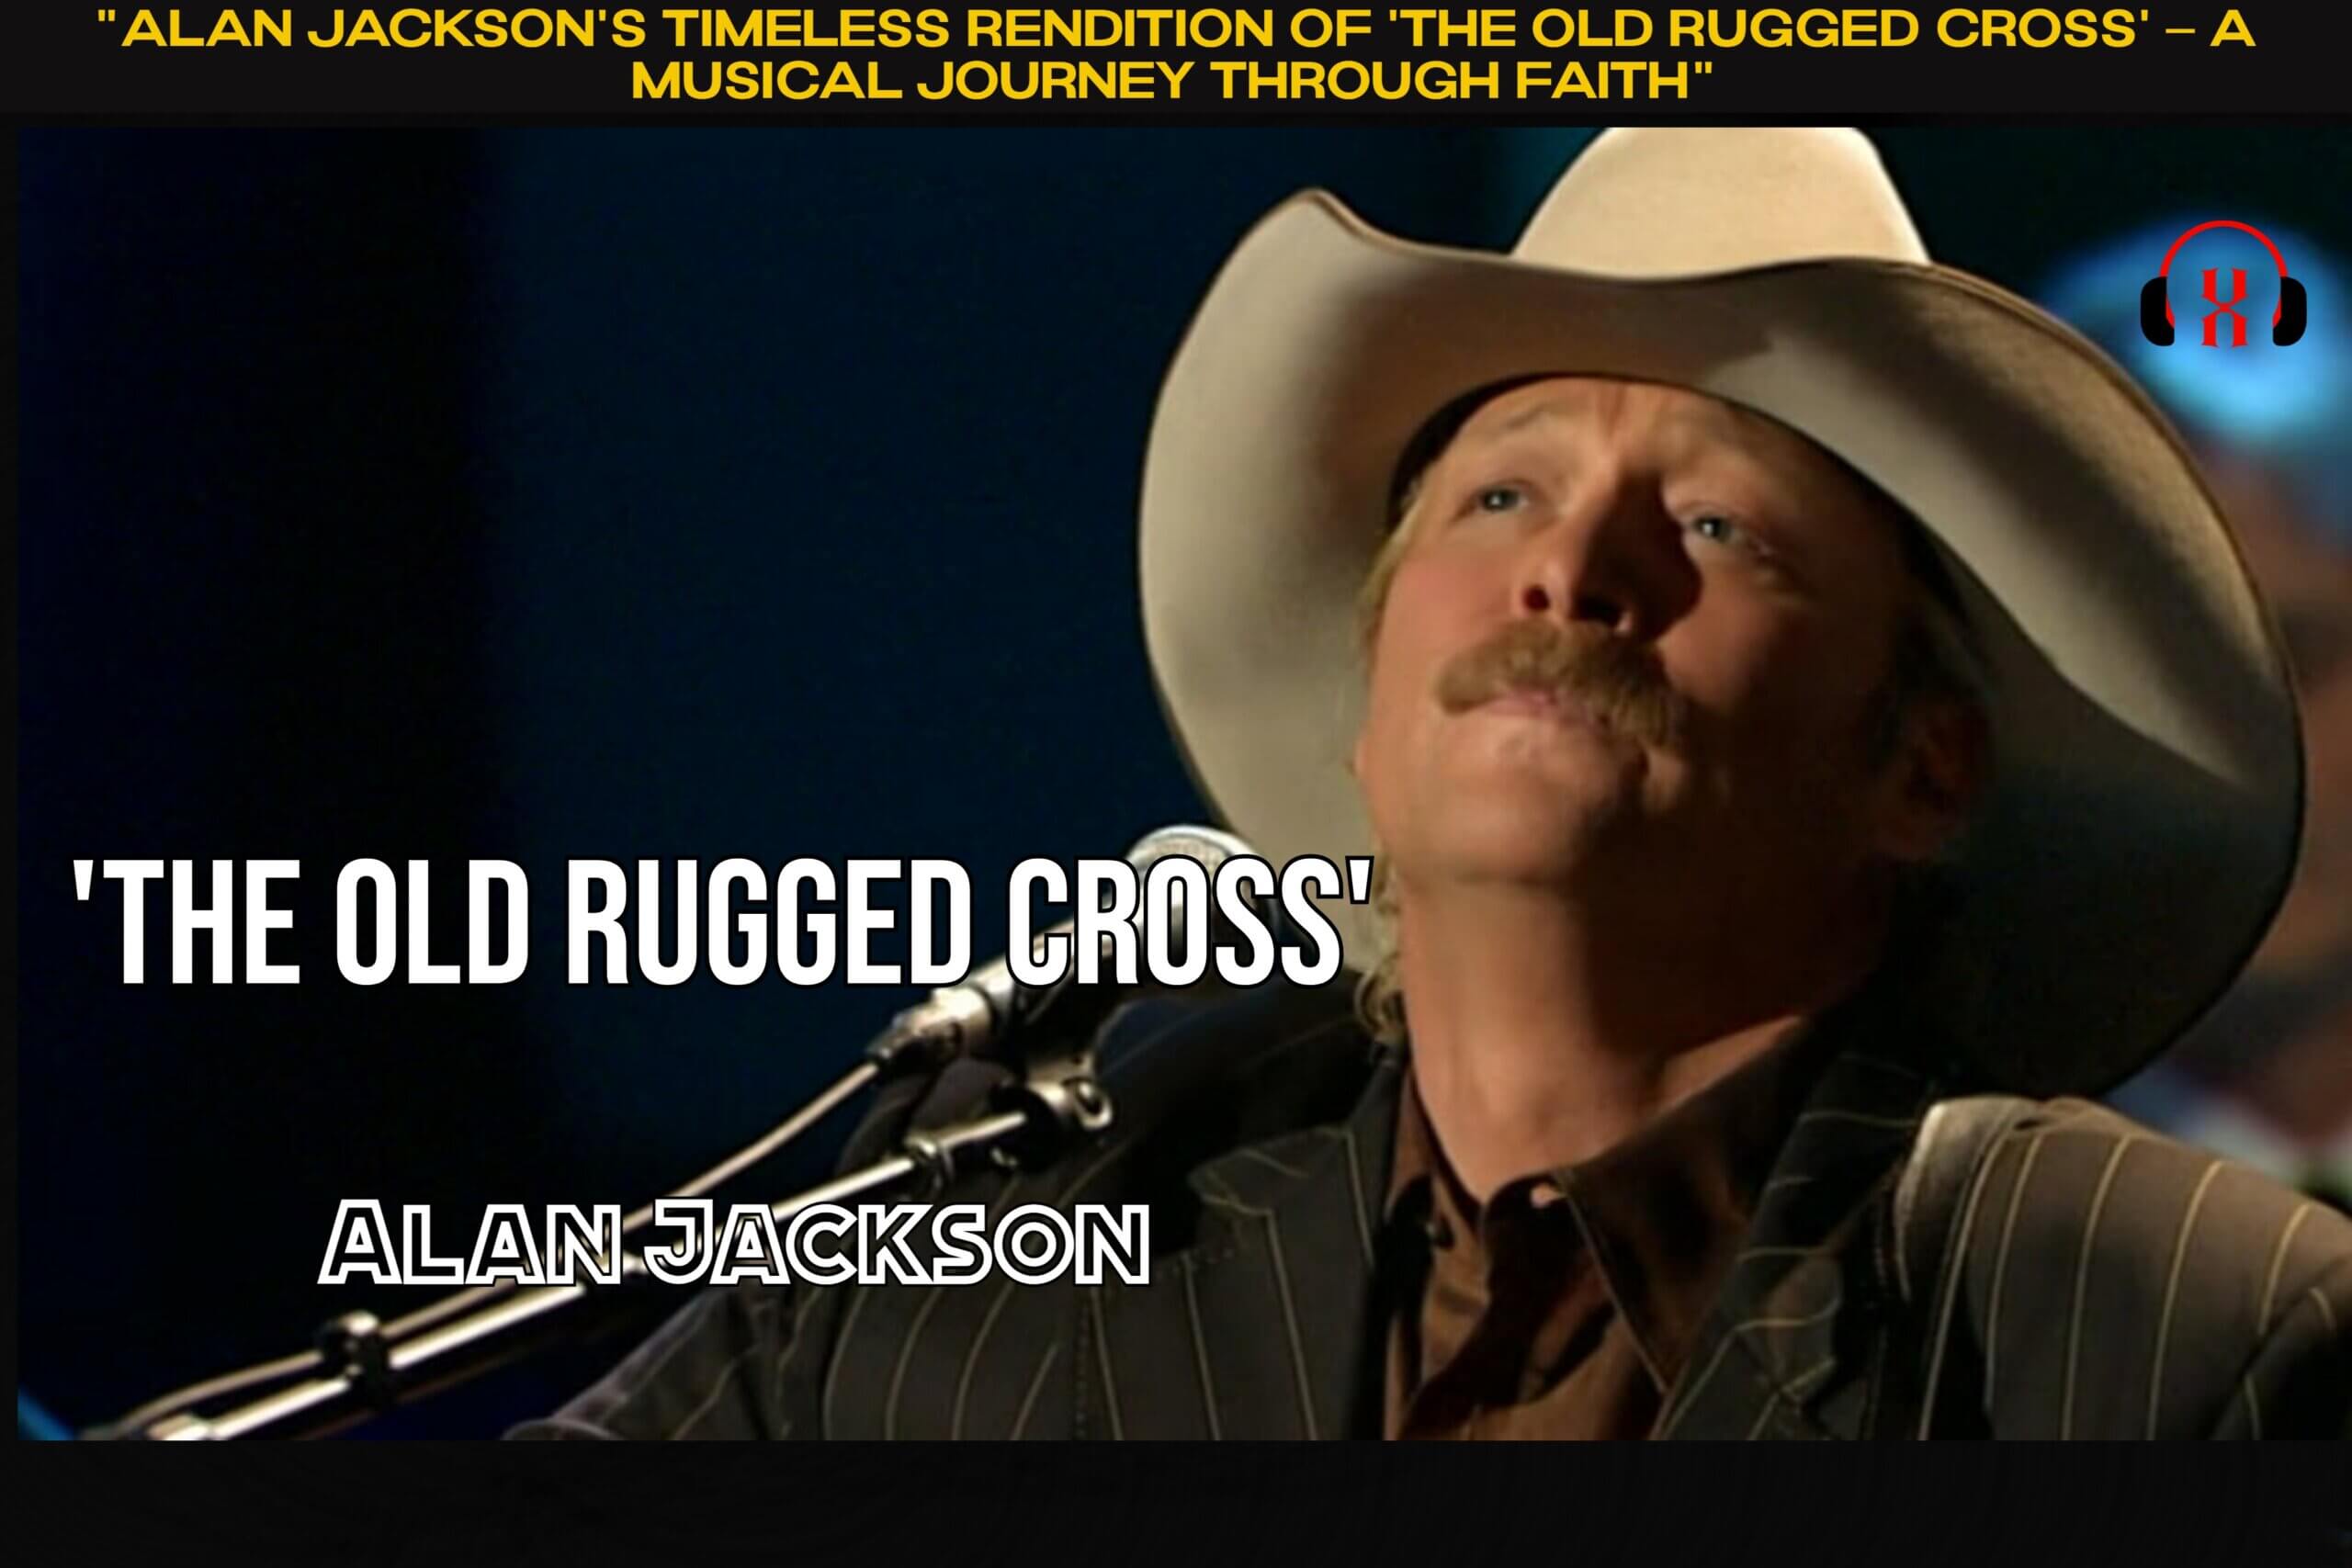 "Alan Jackson's Timeless Rendition of 'The Old Rugged Cross' – A Musical Journey through Faith"